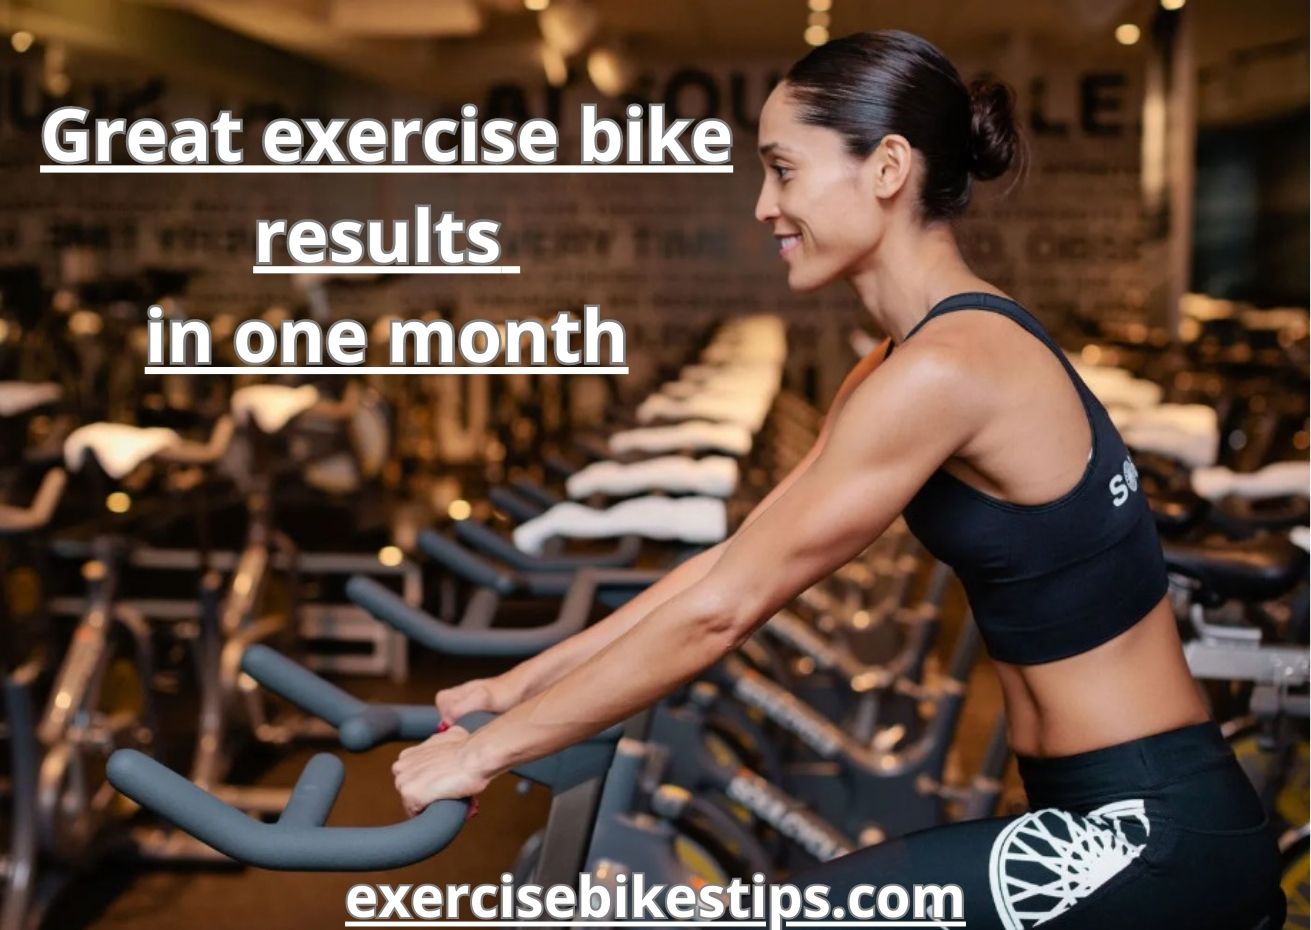 How to achieve the best exercise bike results in 1 month